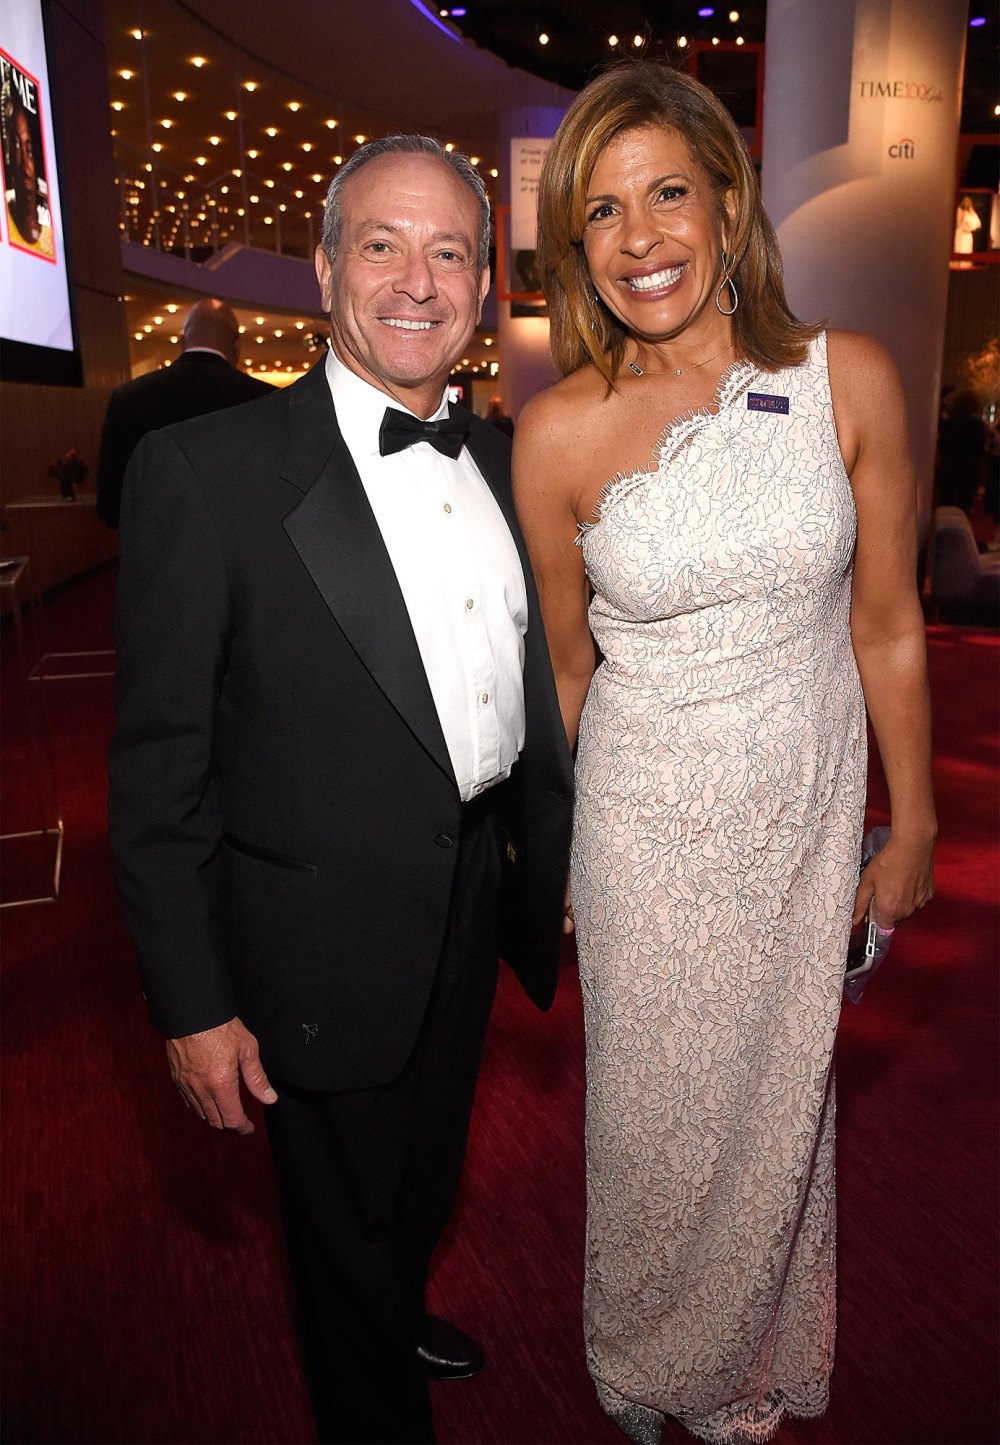 Everything Today Anchor Hoda Kotb Has Said About Marriage Breakups and Dating Through the Years 768 Joel Schiffman and Hoda Kotb